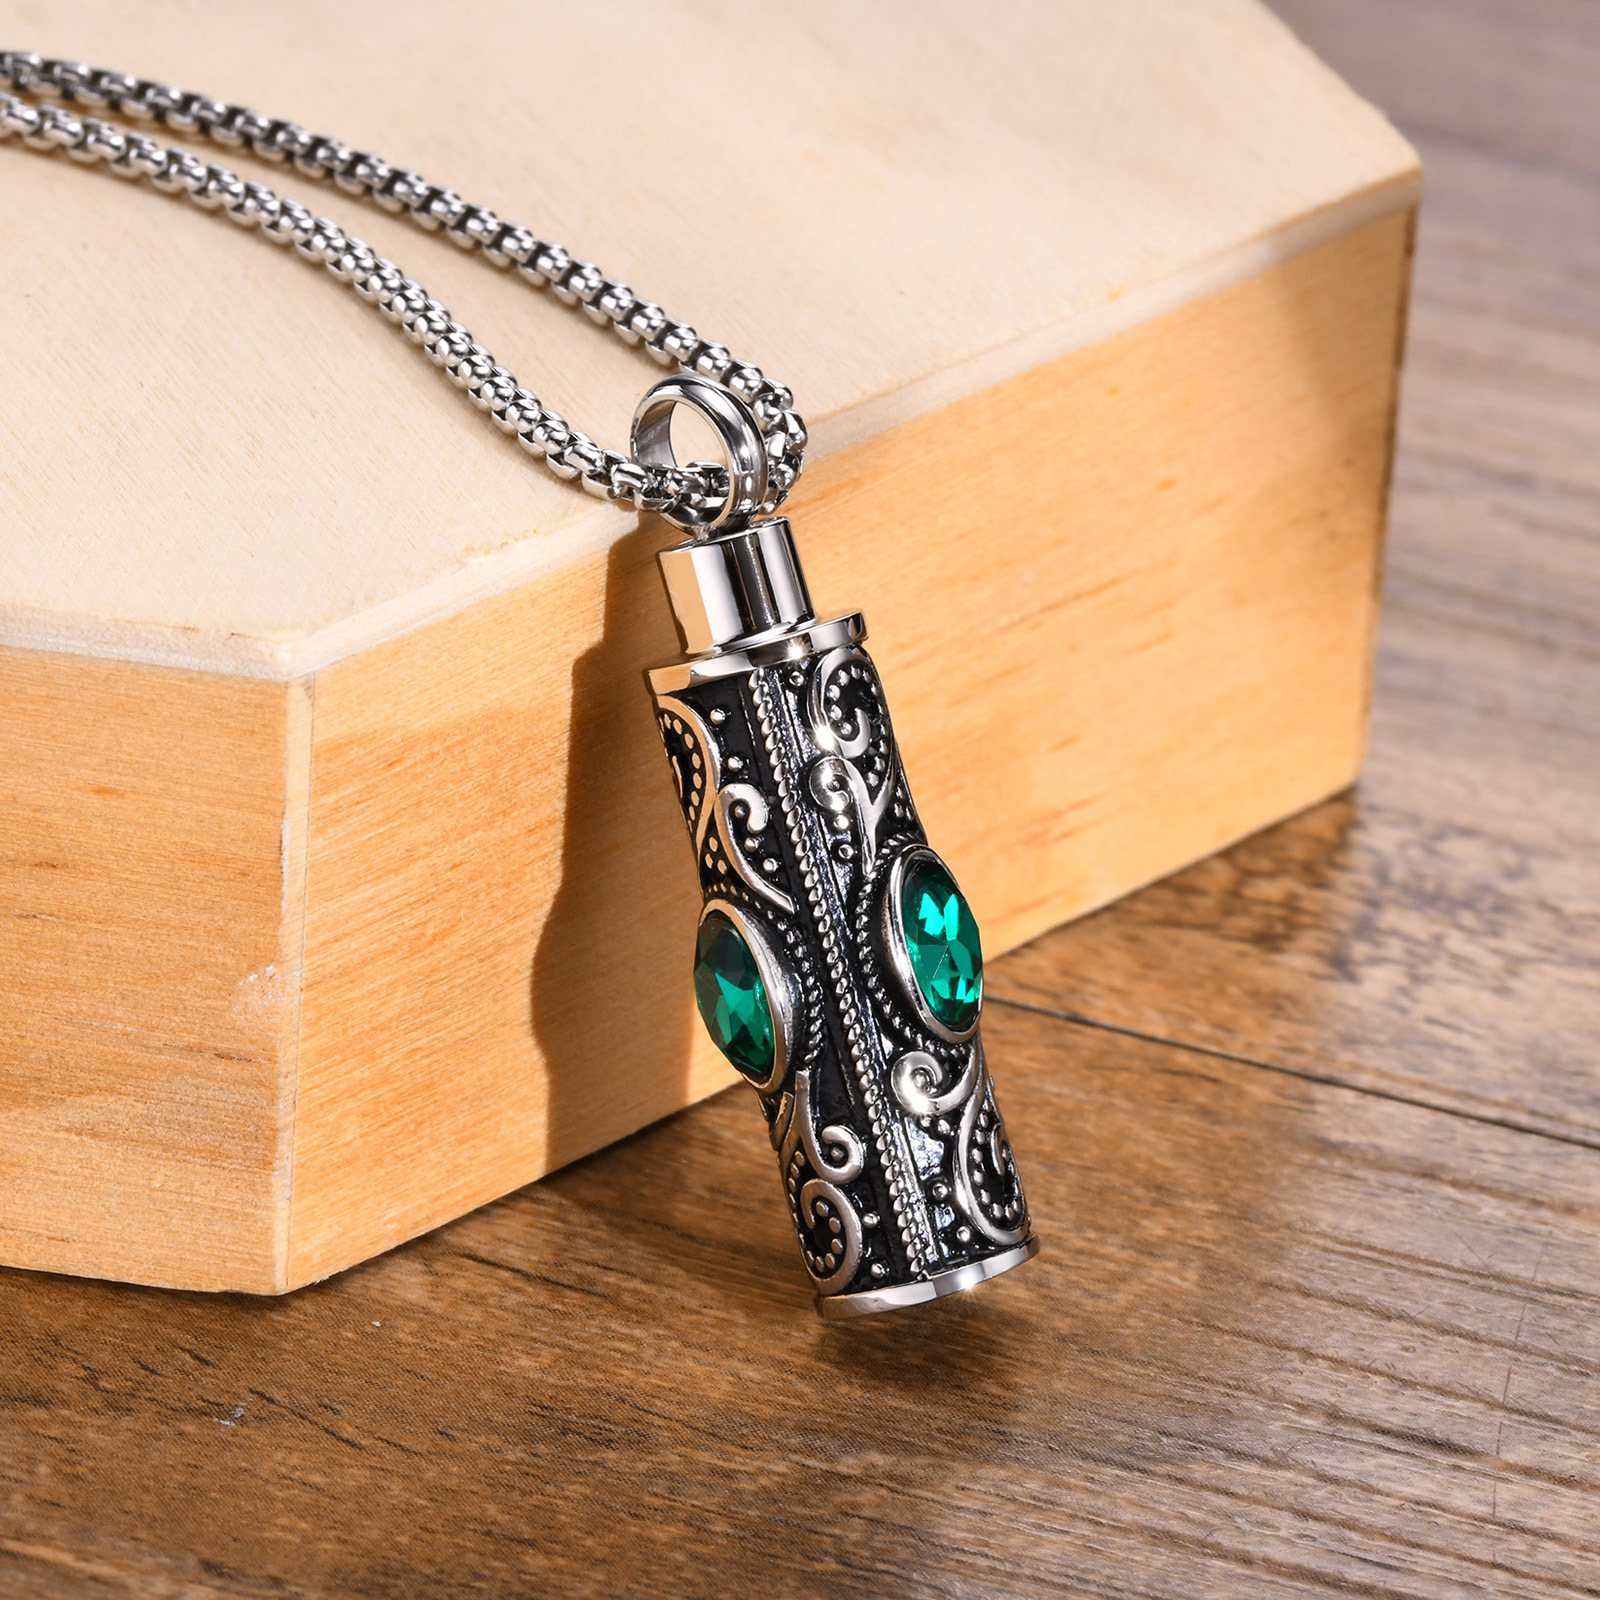 Green pendant necklace